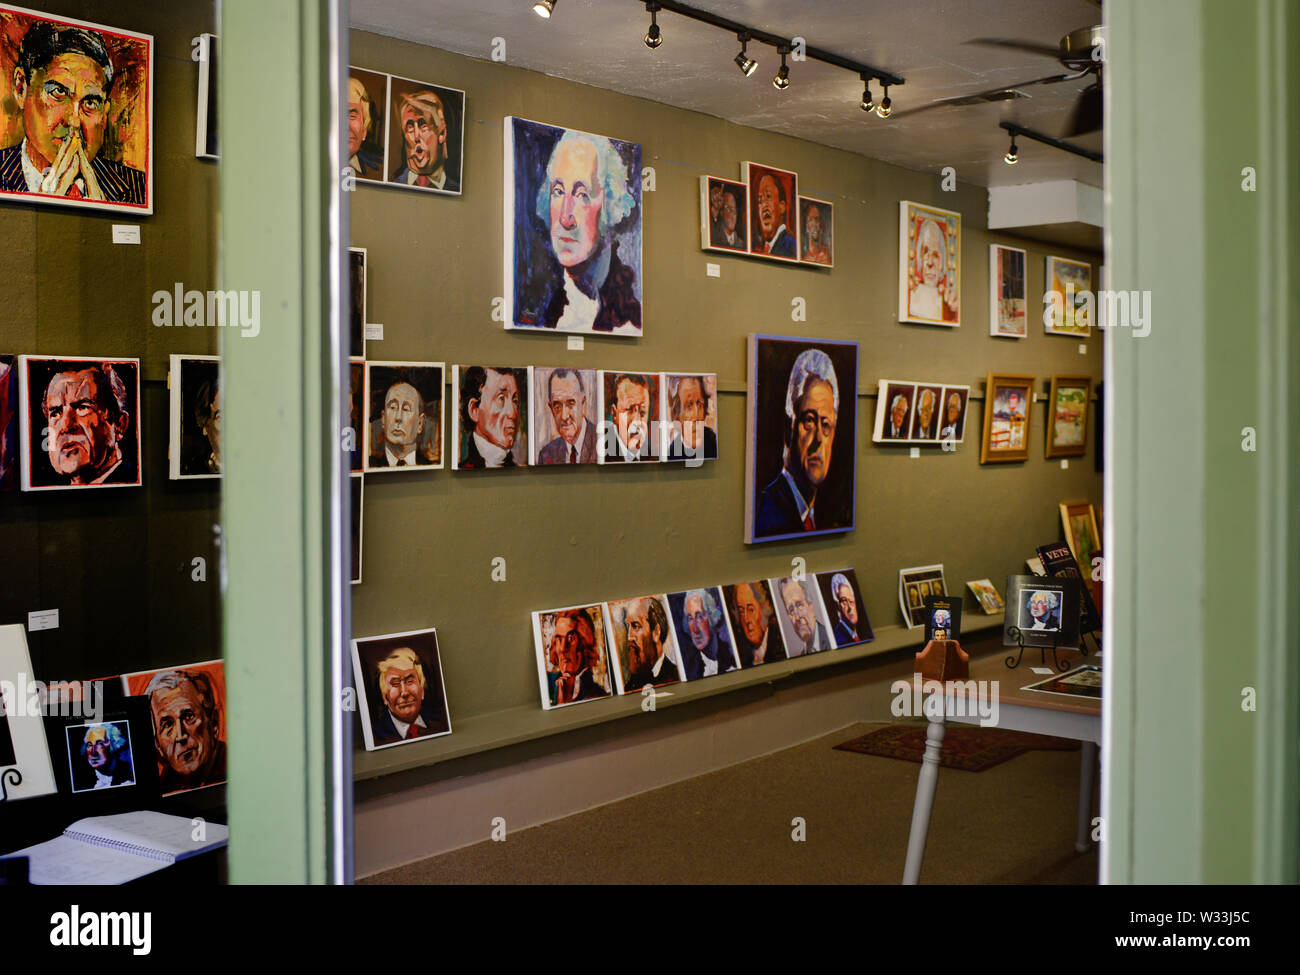 A peek inside the entrance to the JF Thamm Gallery, with his original art collection of Presidents and other politico portraits in the old mining  tow Stock Photo